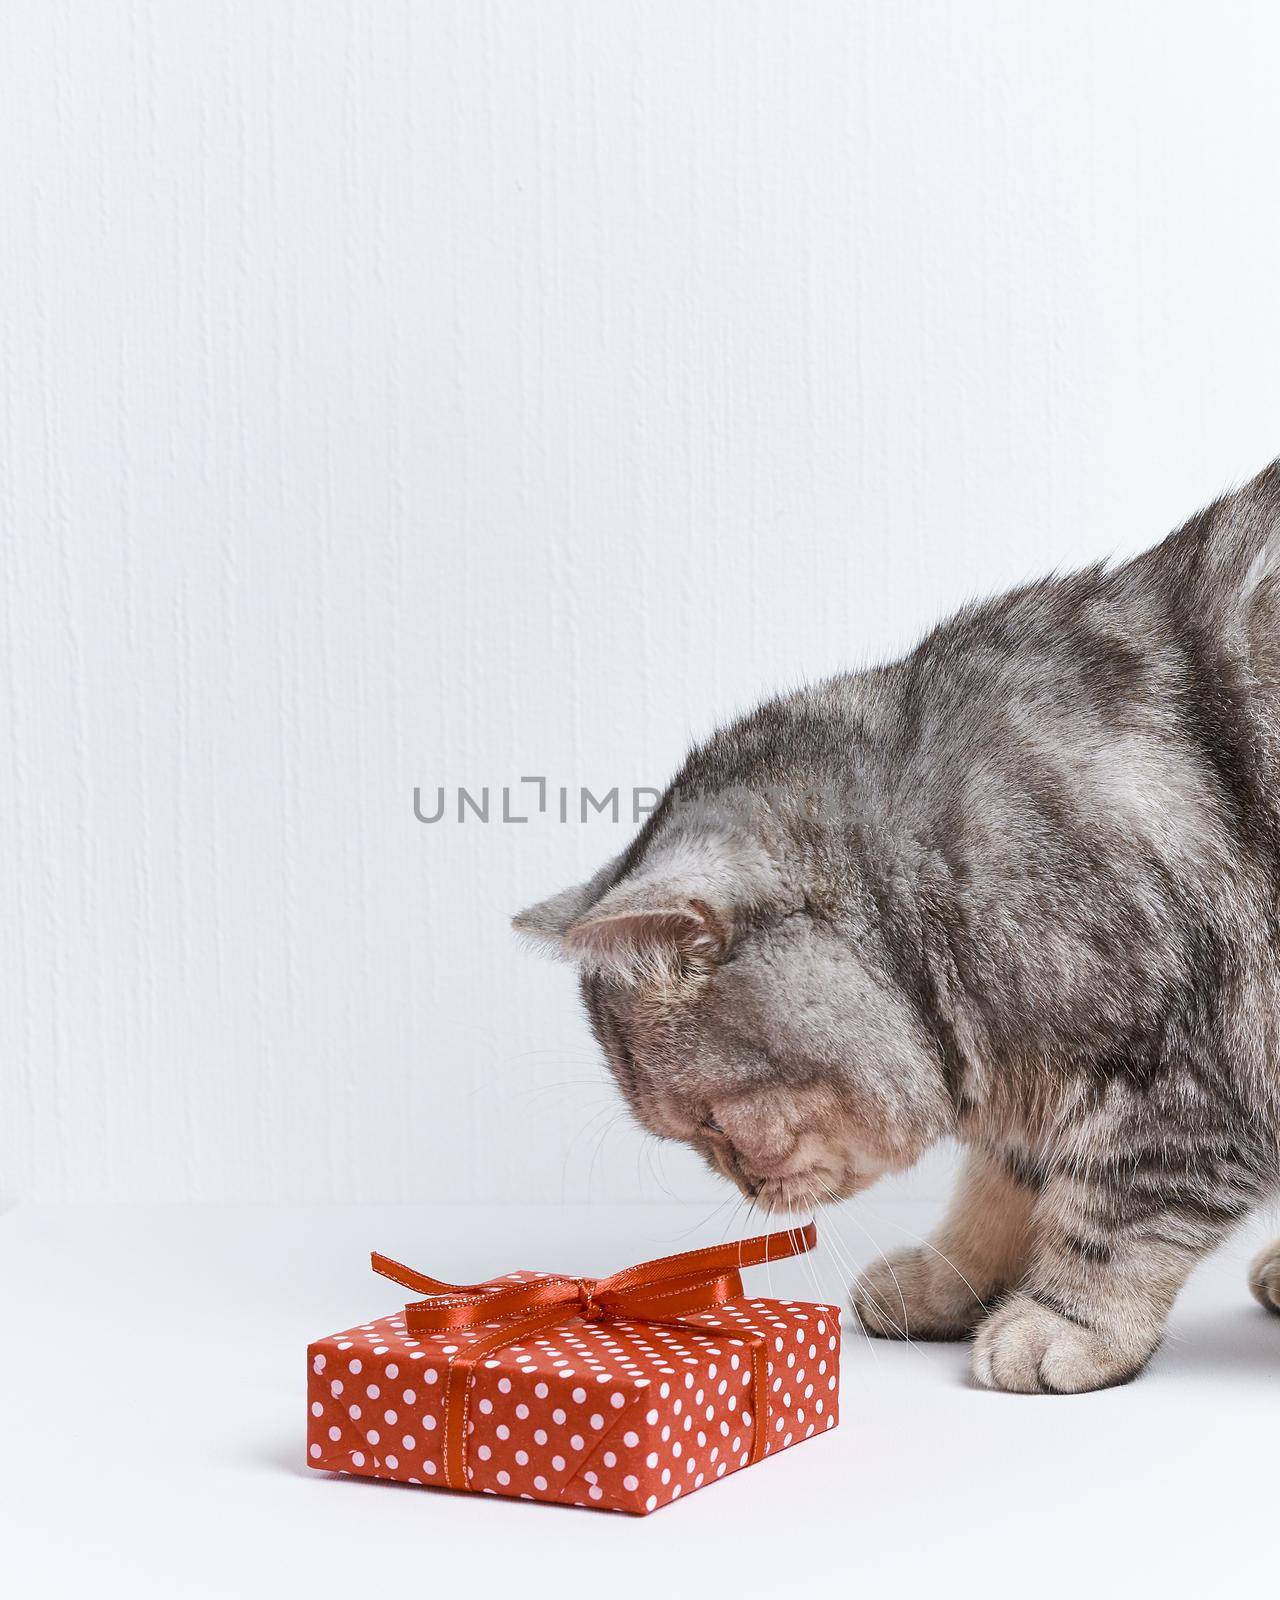 scottish straight cat shiffing ribbon on red gift, white background, copy space, vertical by NataBene